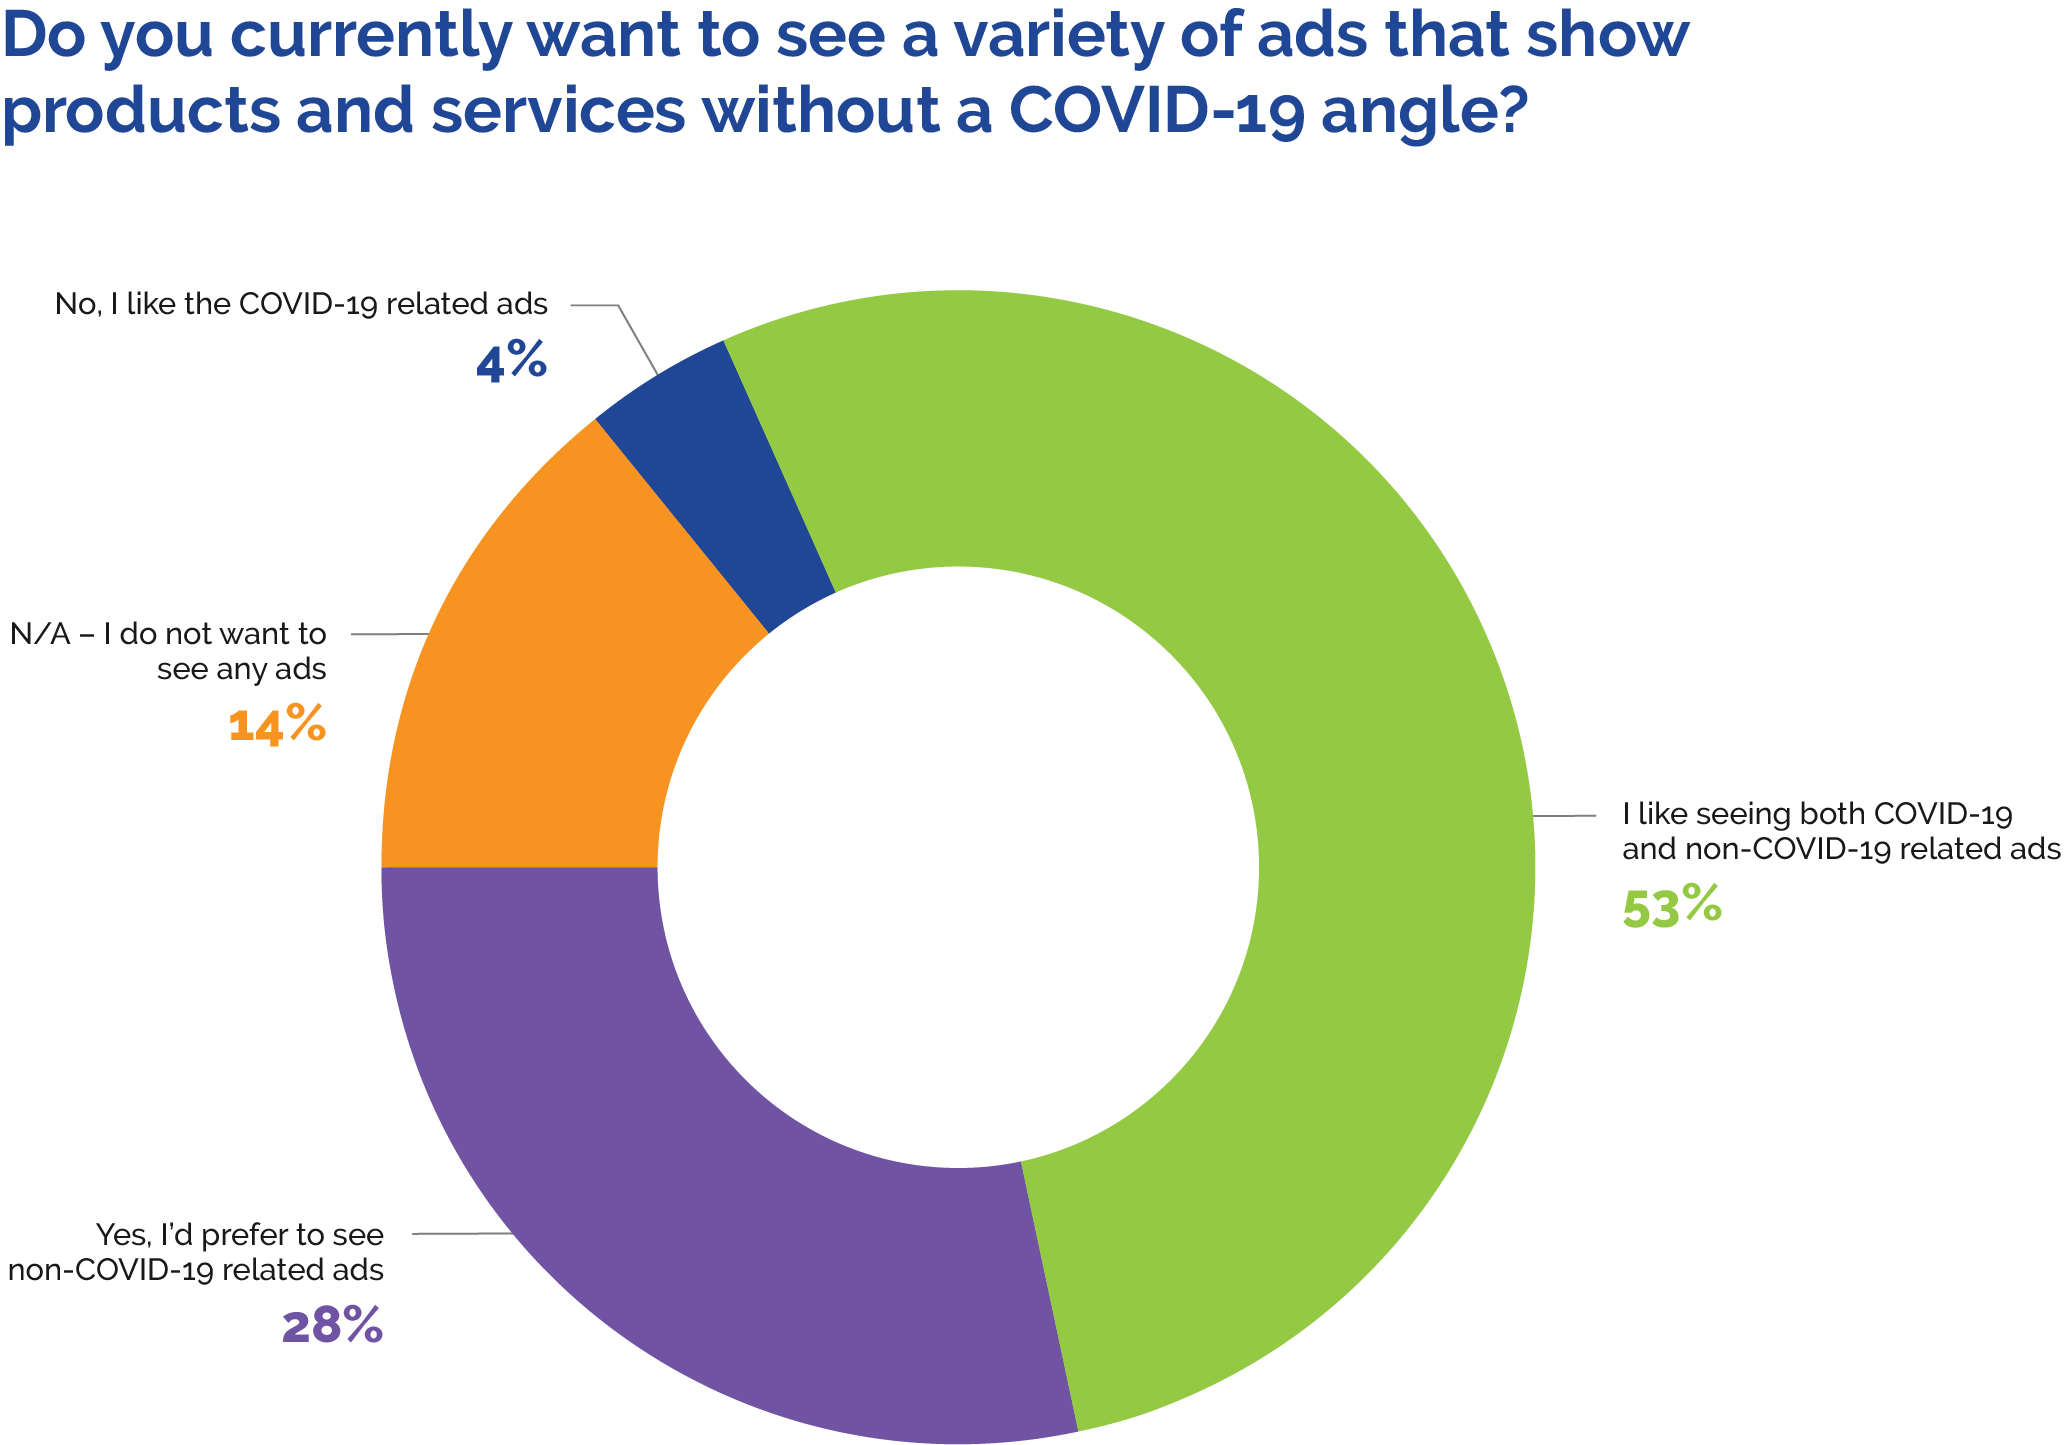 Consumer Ad Preferences During COVID-19 